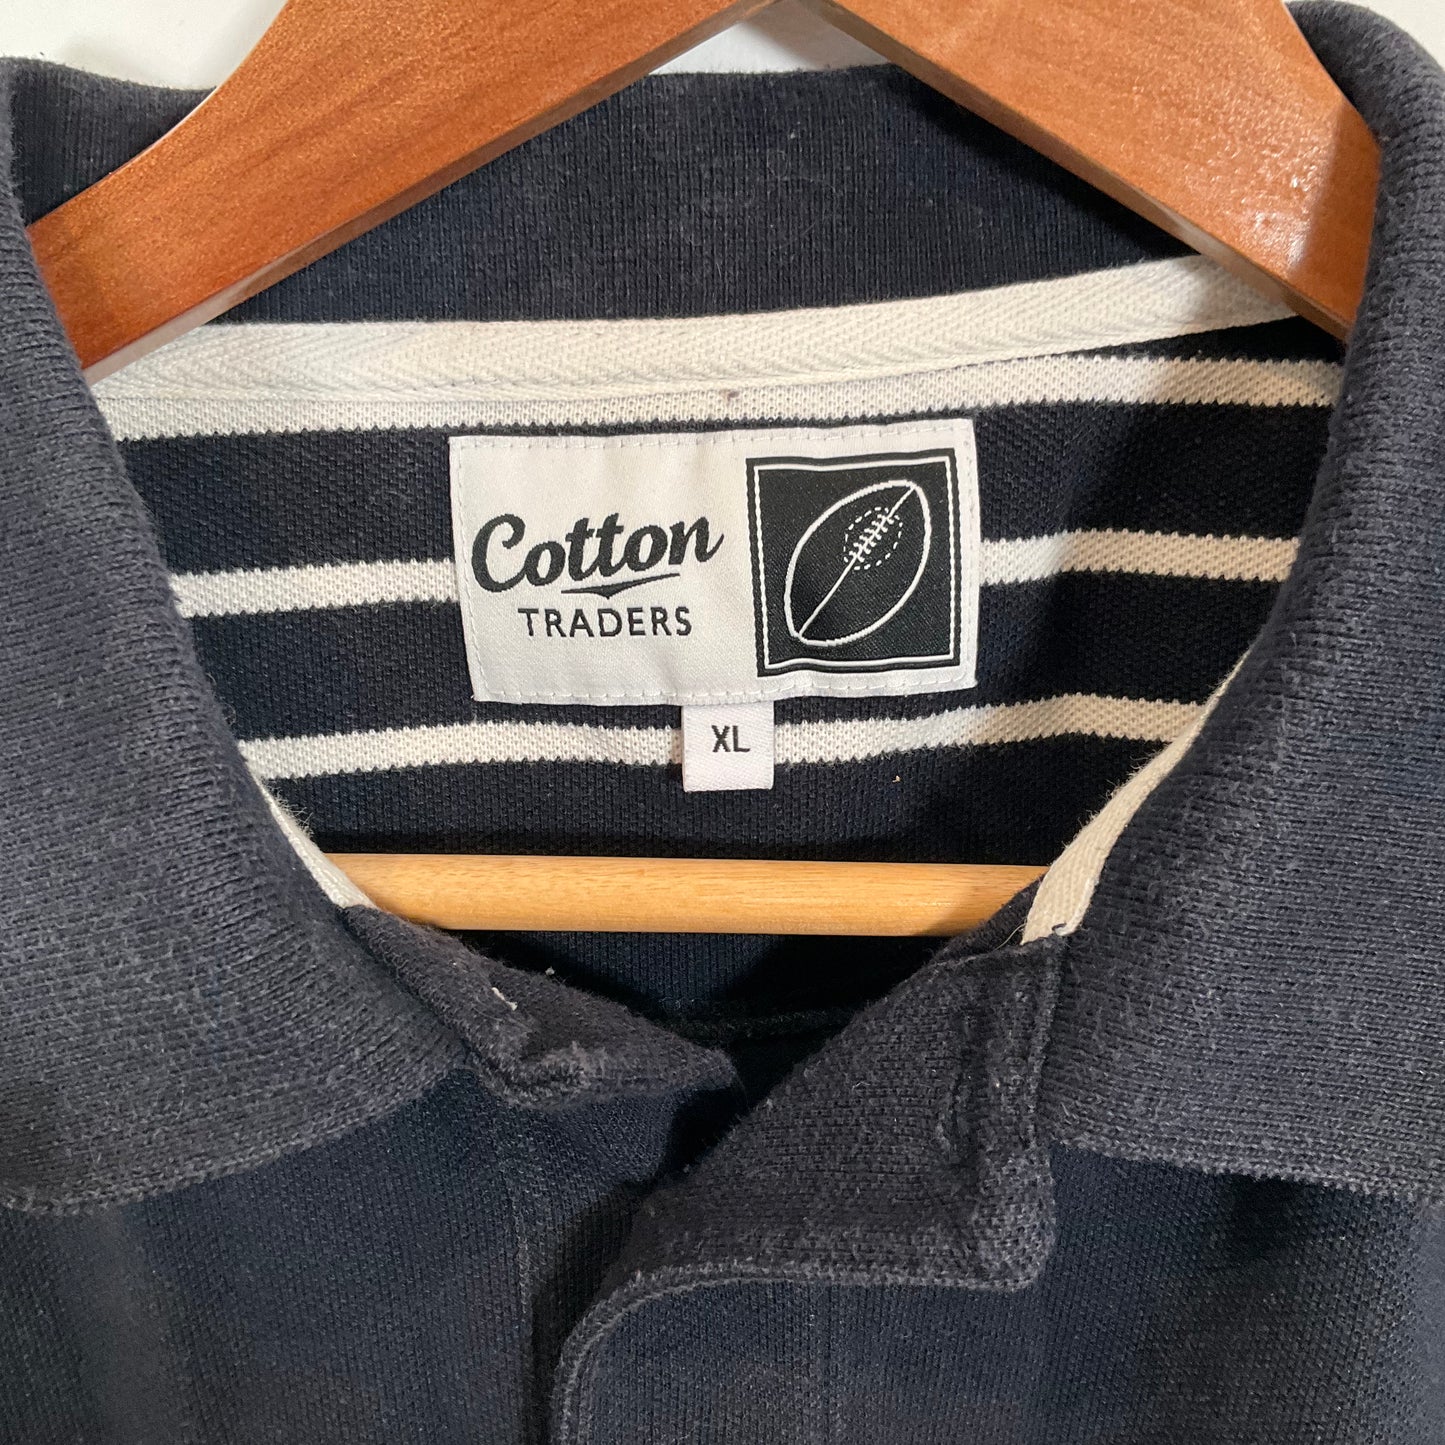 Cotton Traders - Rugby Shirt